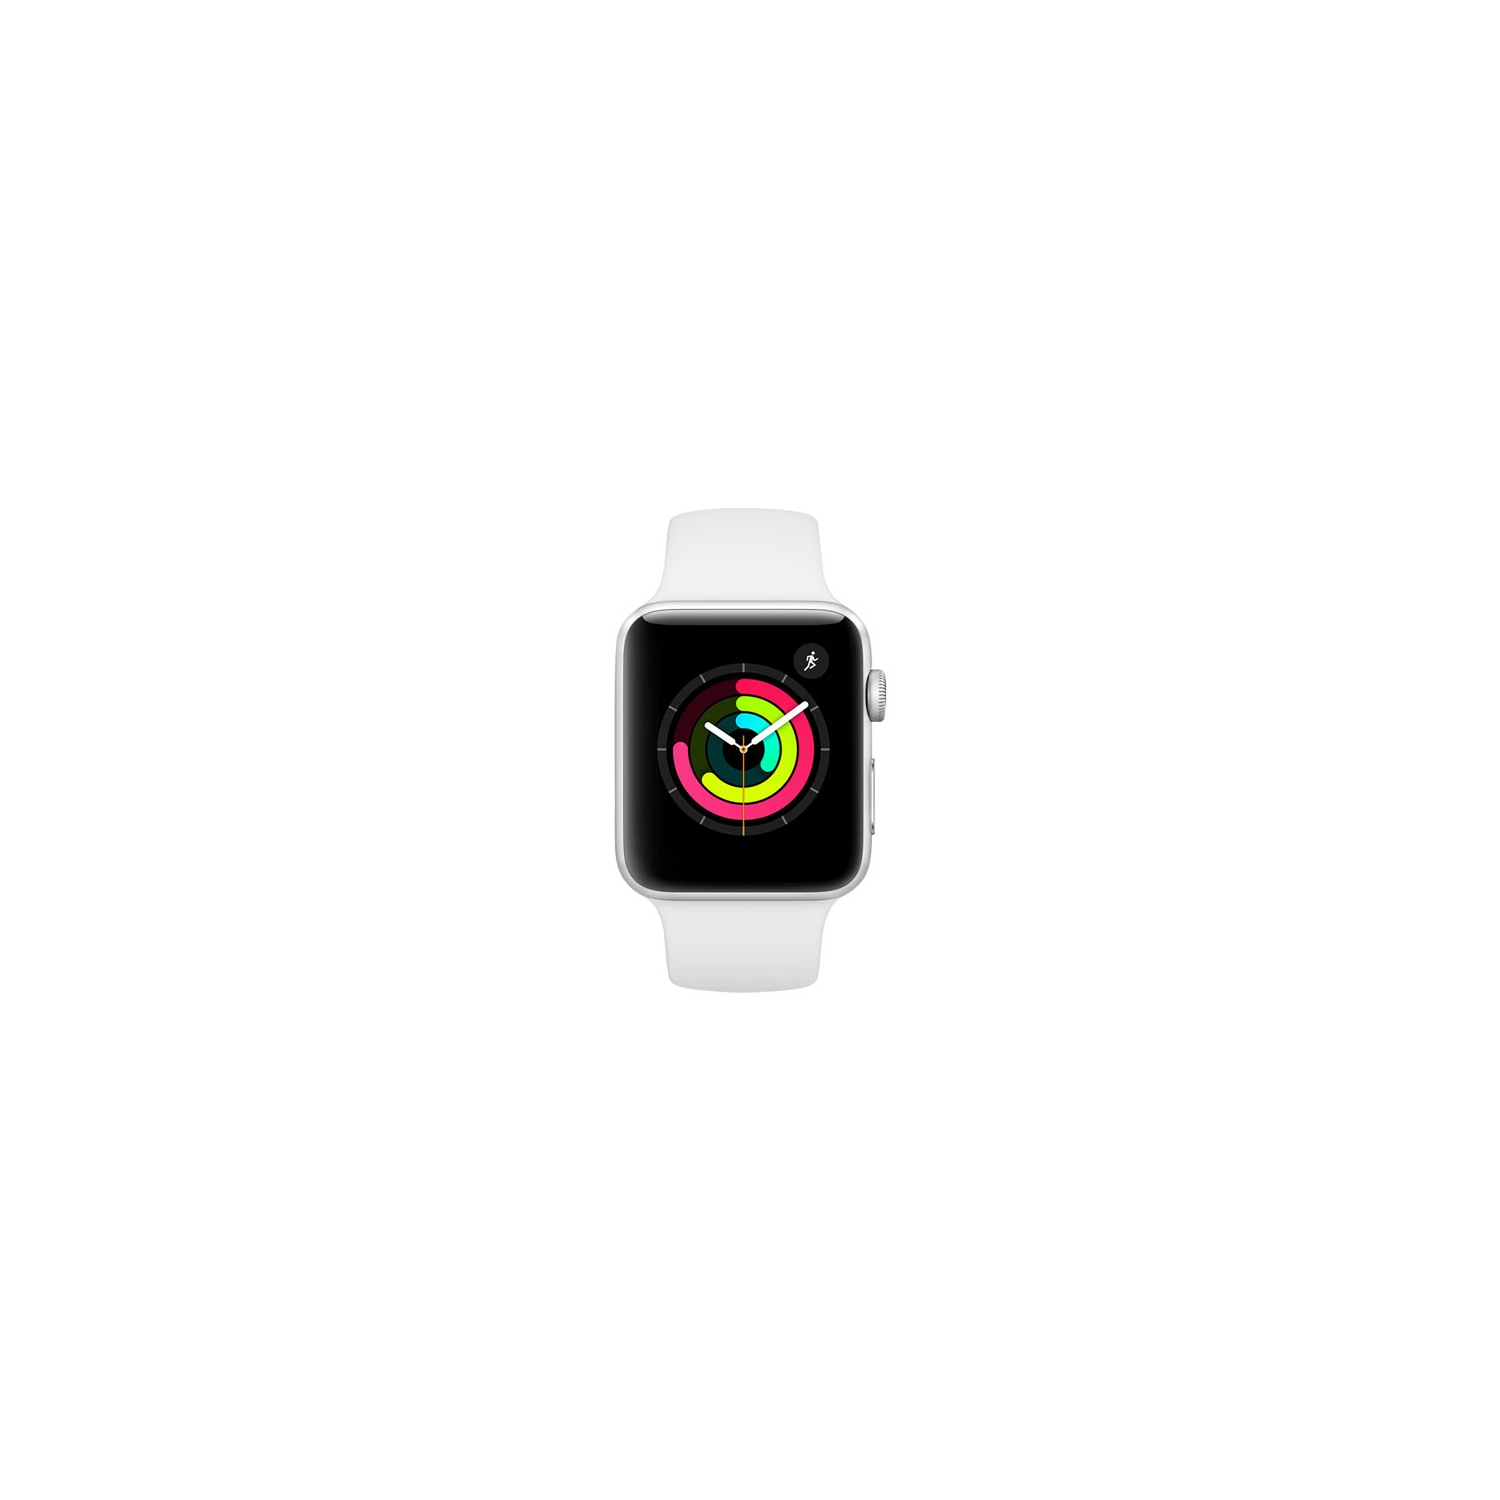 Refurbished (Good) - Apple Watch Series 3 (GPS) 42mm Silver Aluminium Case with White Sport Band